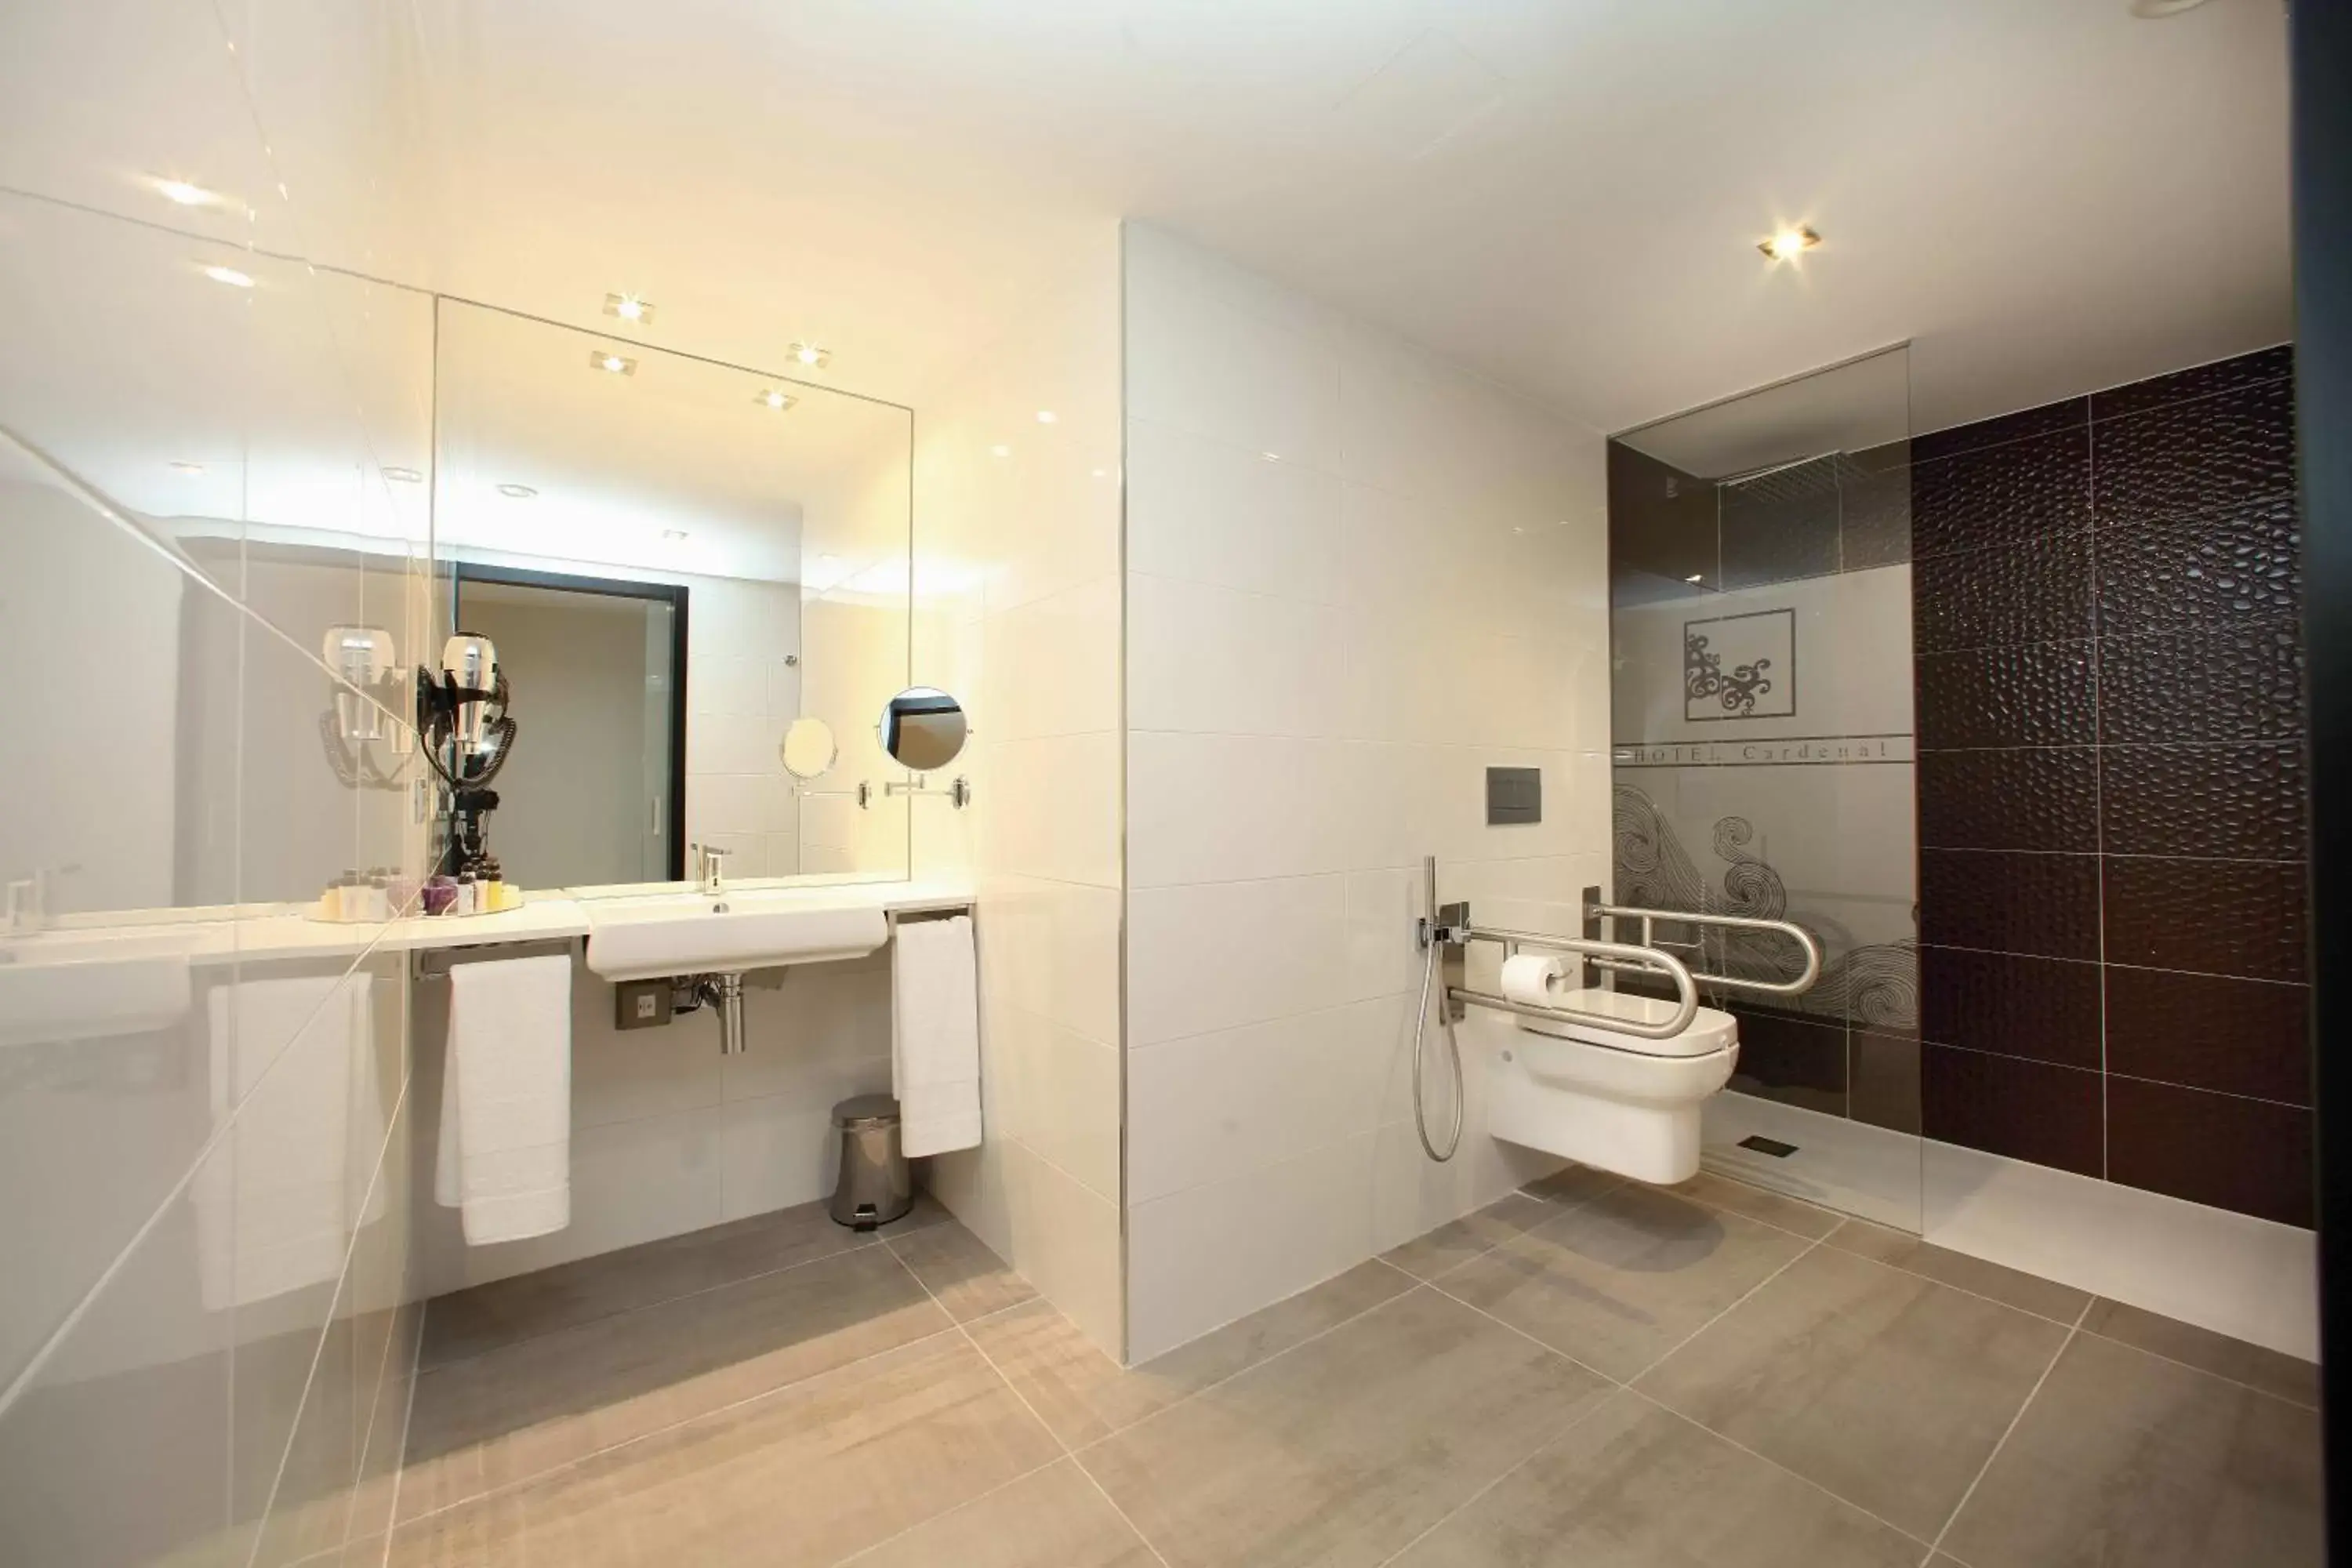 Facility for disabled guests, Bathroom in Hotel Cardenal